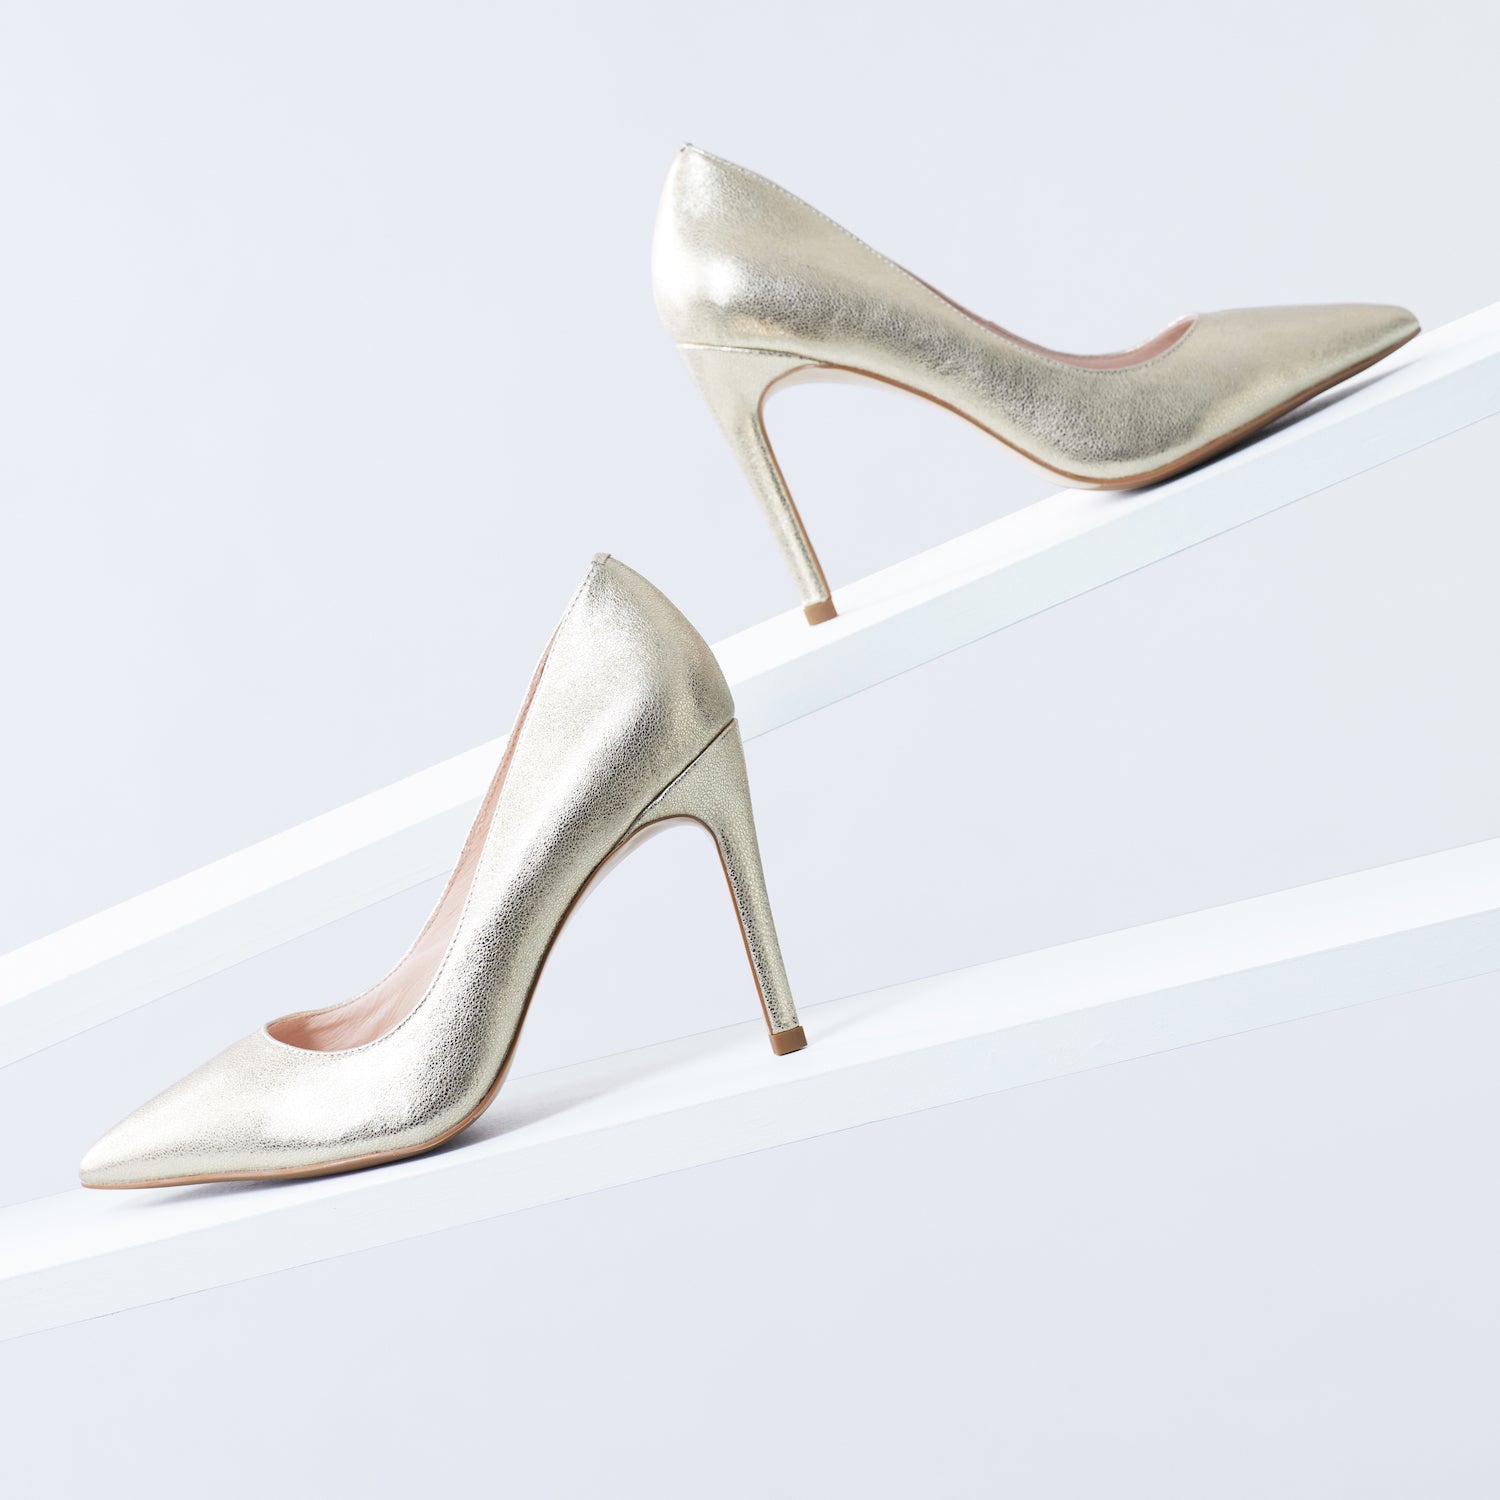 Nemesis Heel 95mm | Muted gold leather